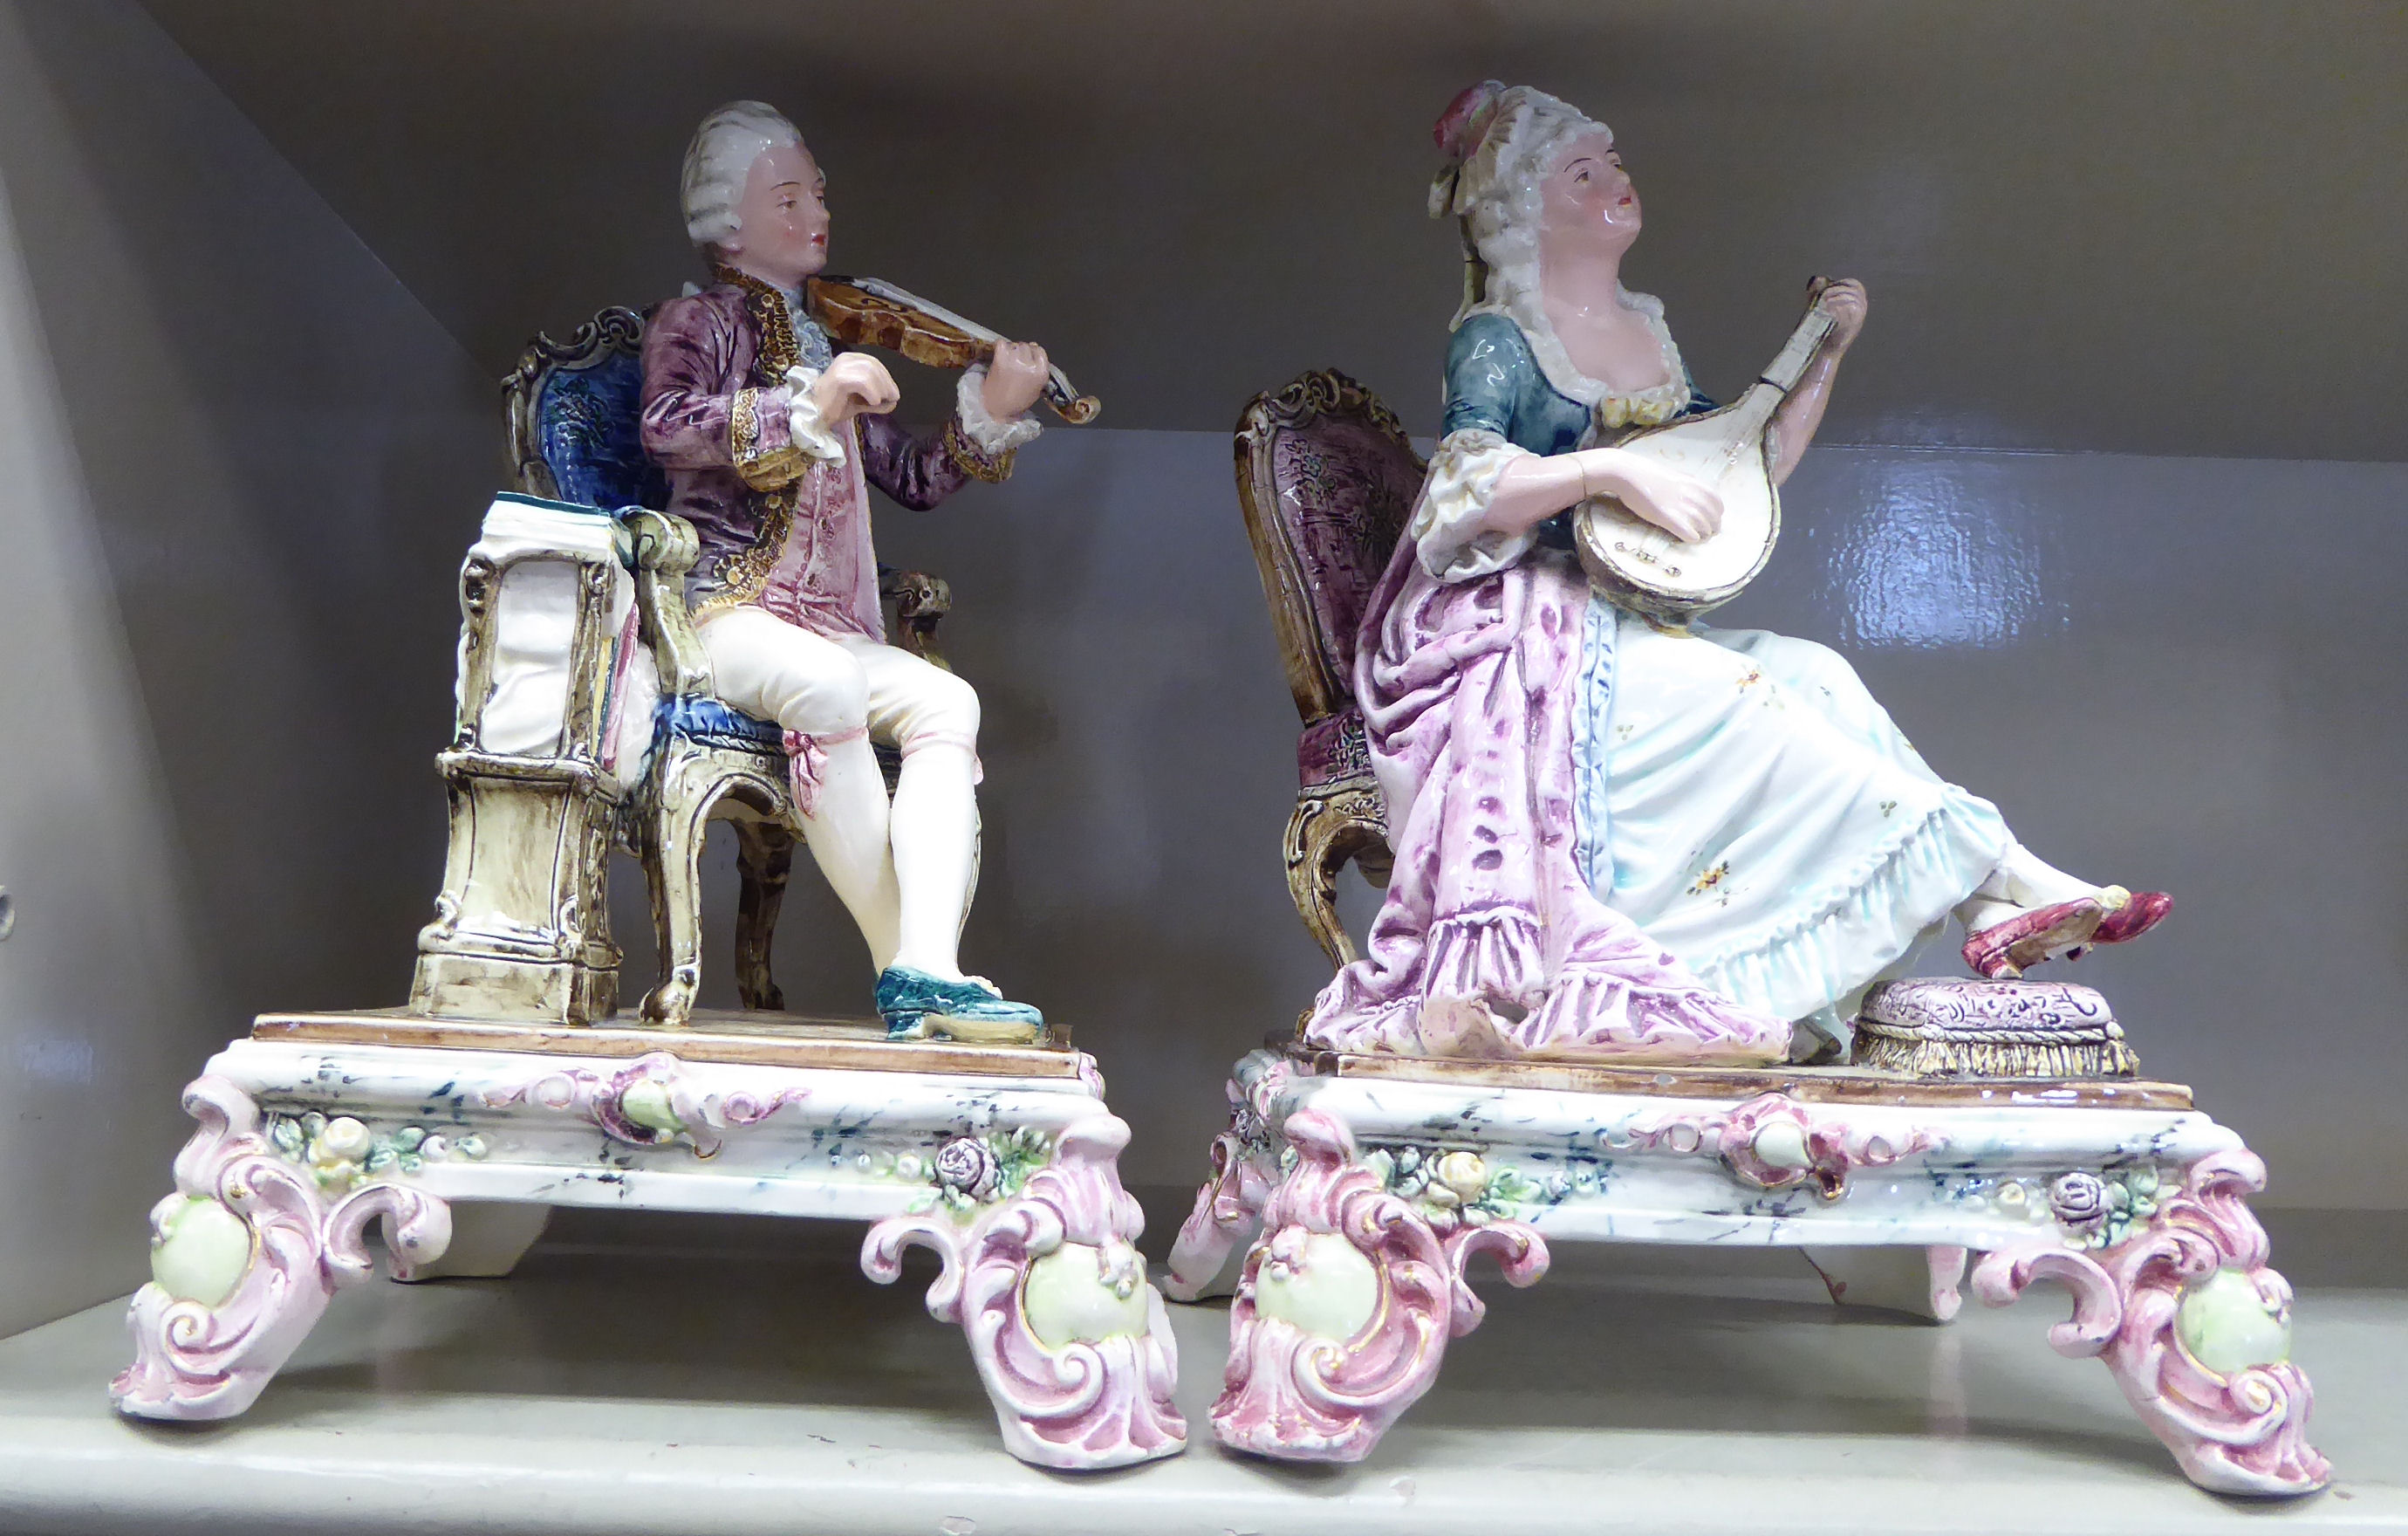 Two similar early 20thC European porcelain figures, a man and woman wearing period costume,